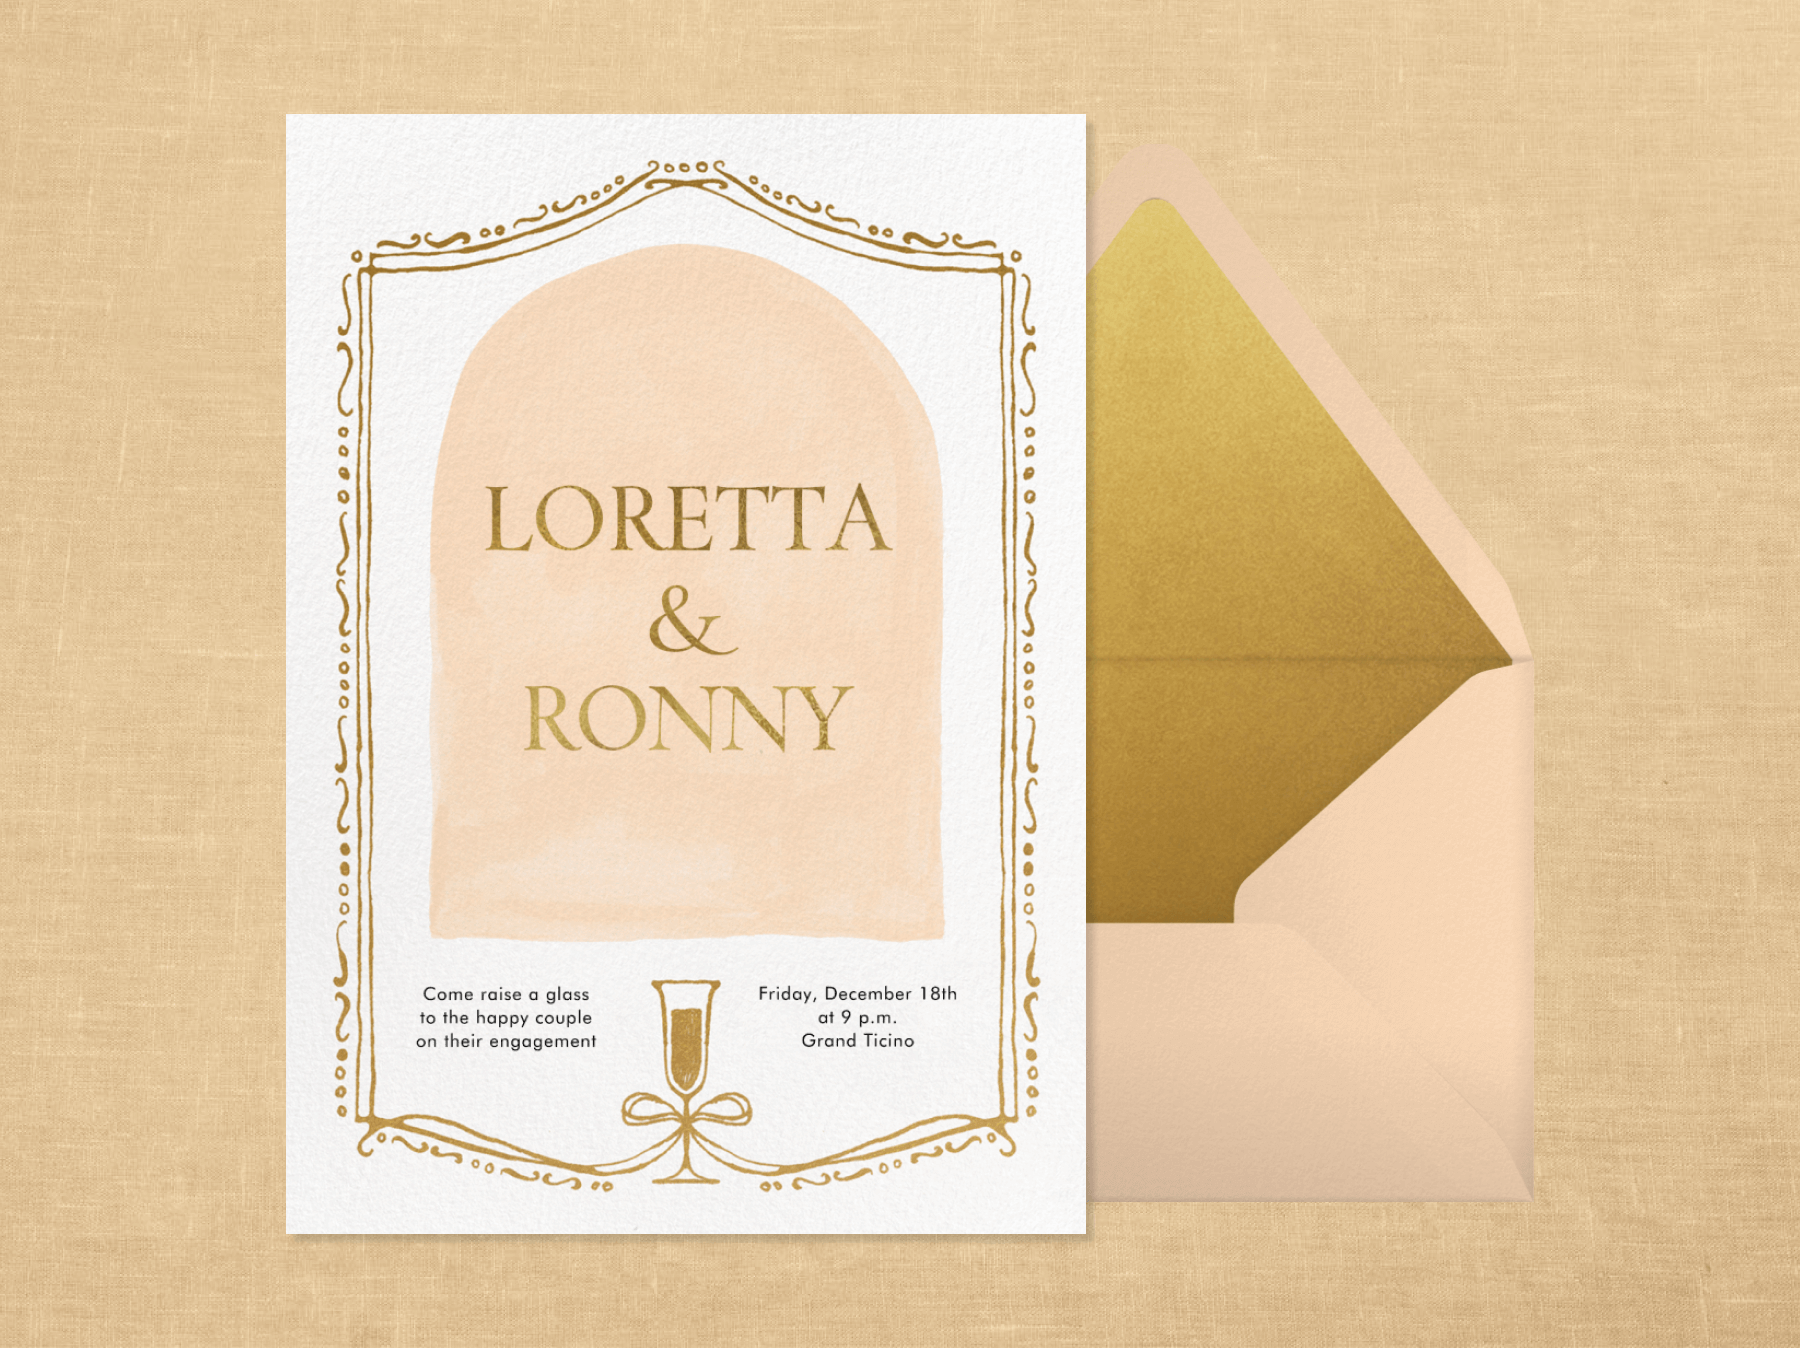 An engagement party invitation featuring a champagne glass and frame motif paired with a blush and gold envelope.